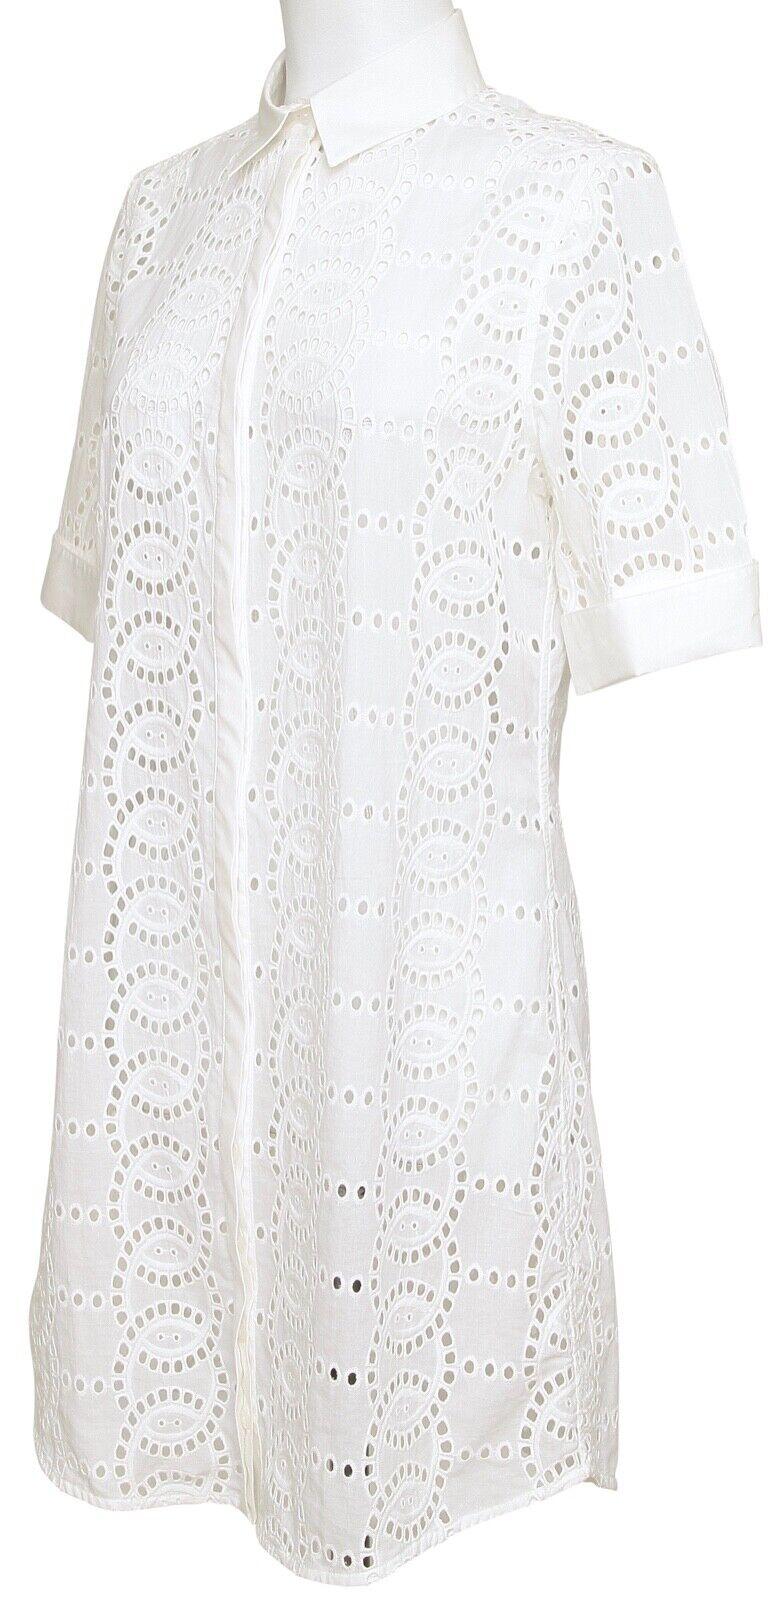 
GUARANTEED AUTHENTIC ANNE FONTAINE WHITE EYELET SHIRT DRESS


Design:
- Fresh white shirt style dress, eyelet design.
- Front covered button closure.
- Pointed collar.
- Short sleeves with button closure.
- Unlined.

Size: 40

Measurements